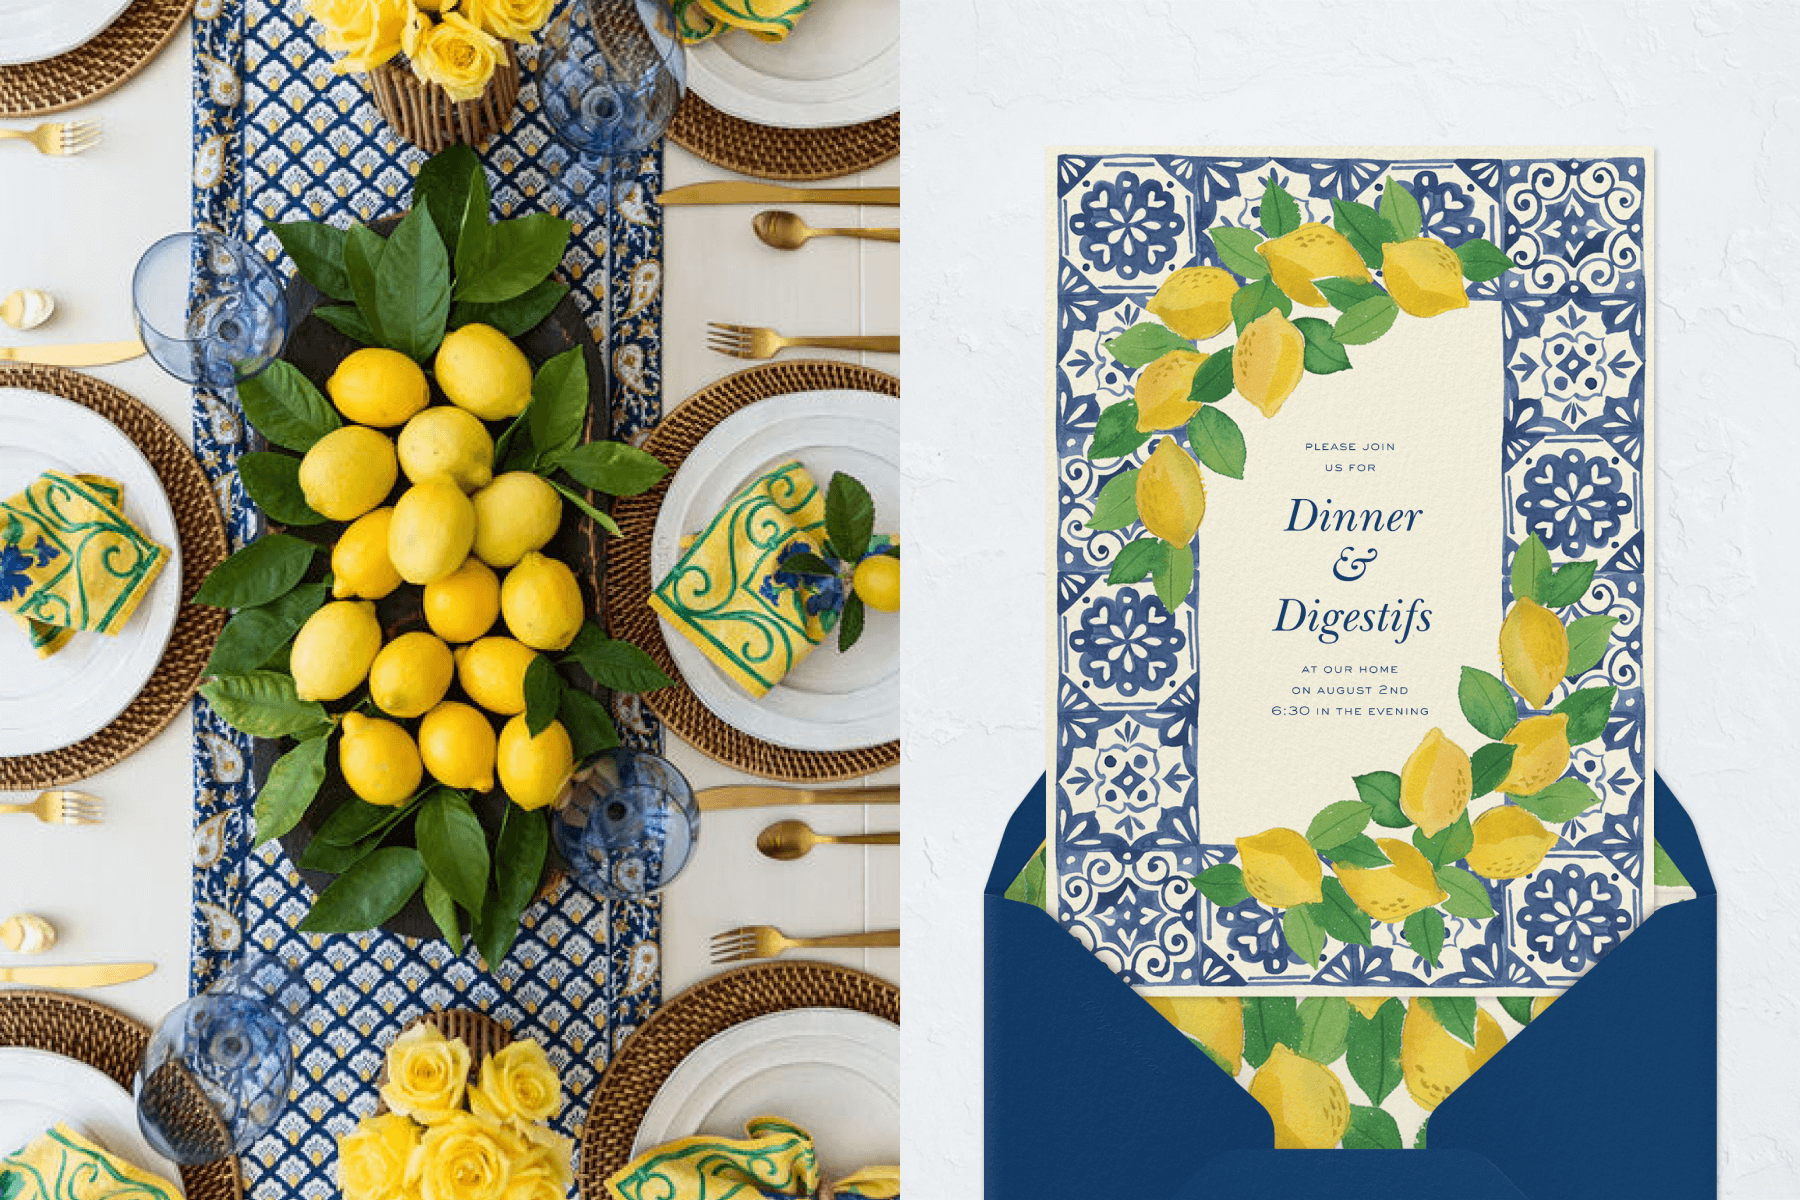 Left: A banquet table shown from above has a plate of lemons and green leaves as a centerpiece with yellow patterned napkins on plates with rattan chargers and gold cutlery. Right: An invitation for “Dinner & Digestifs” has a blue and white tile-like border with bunches of lemons in two corners, above a navy blue envelope.